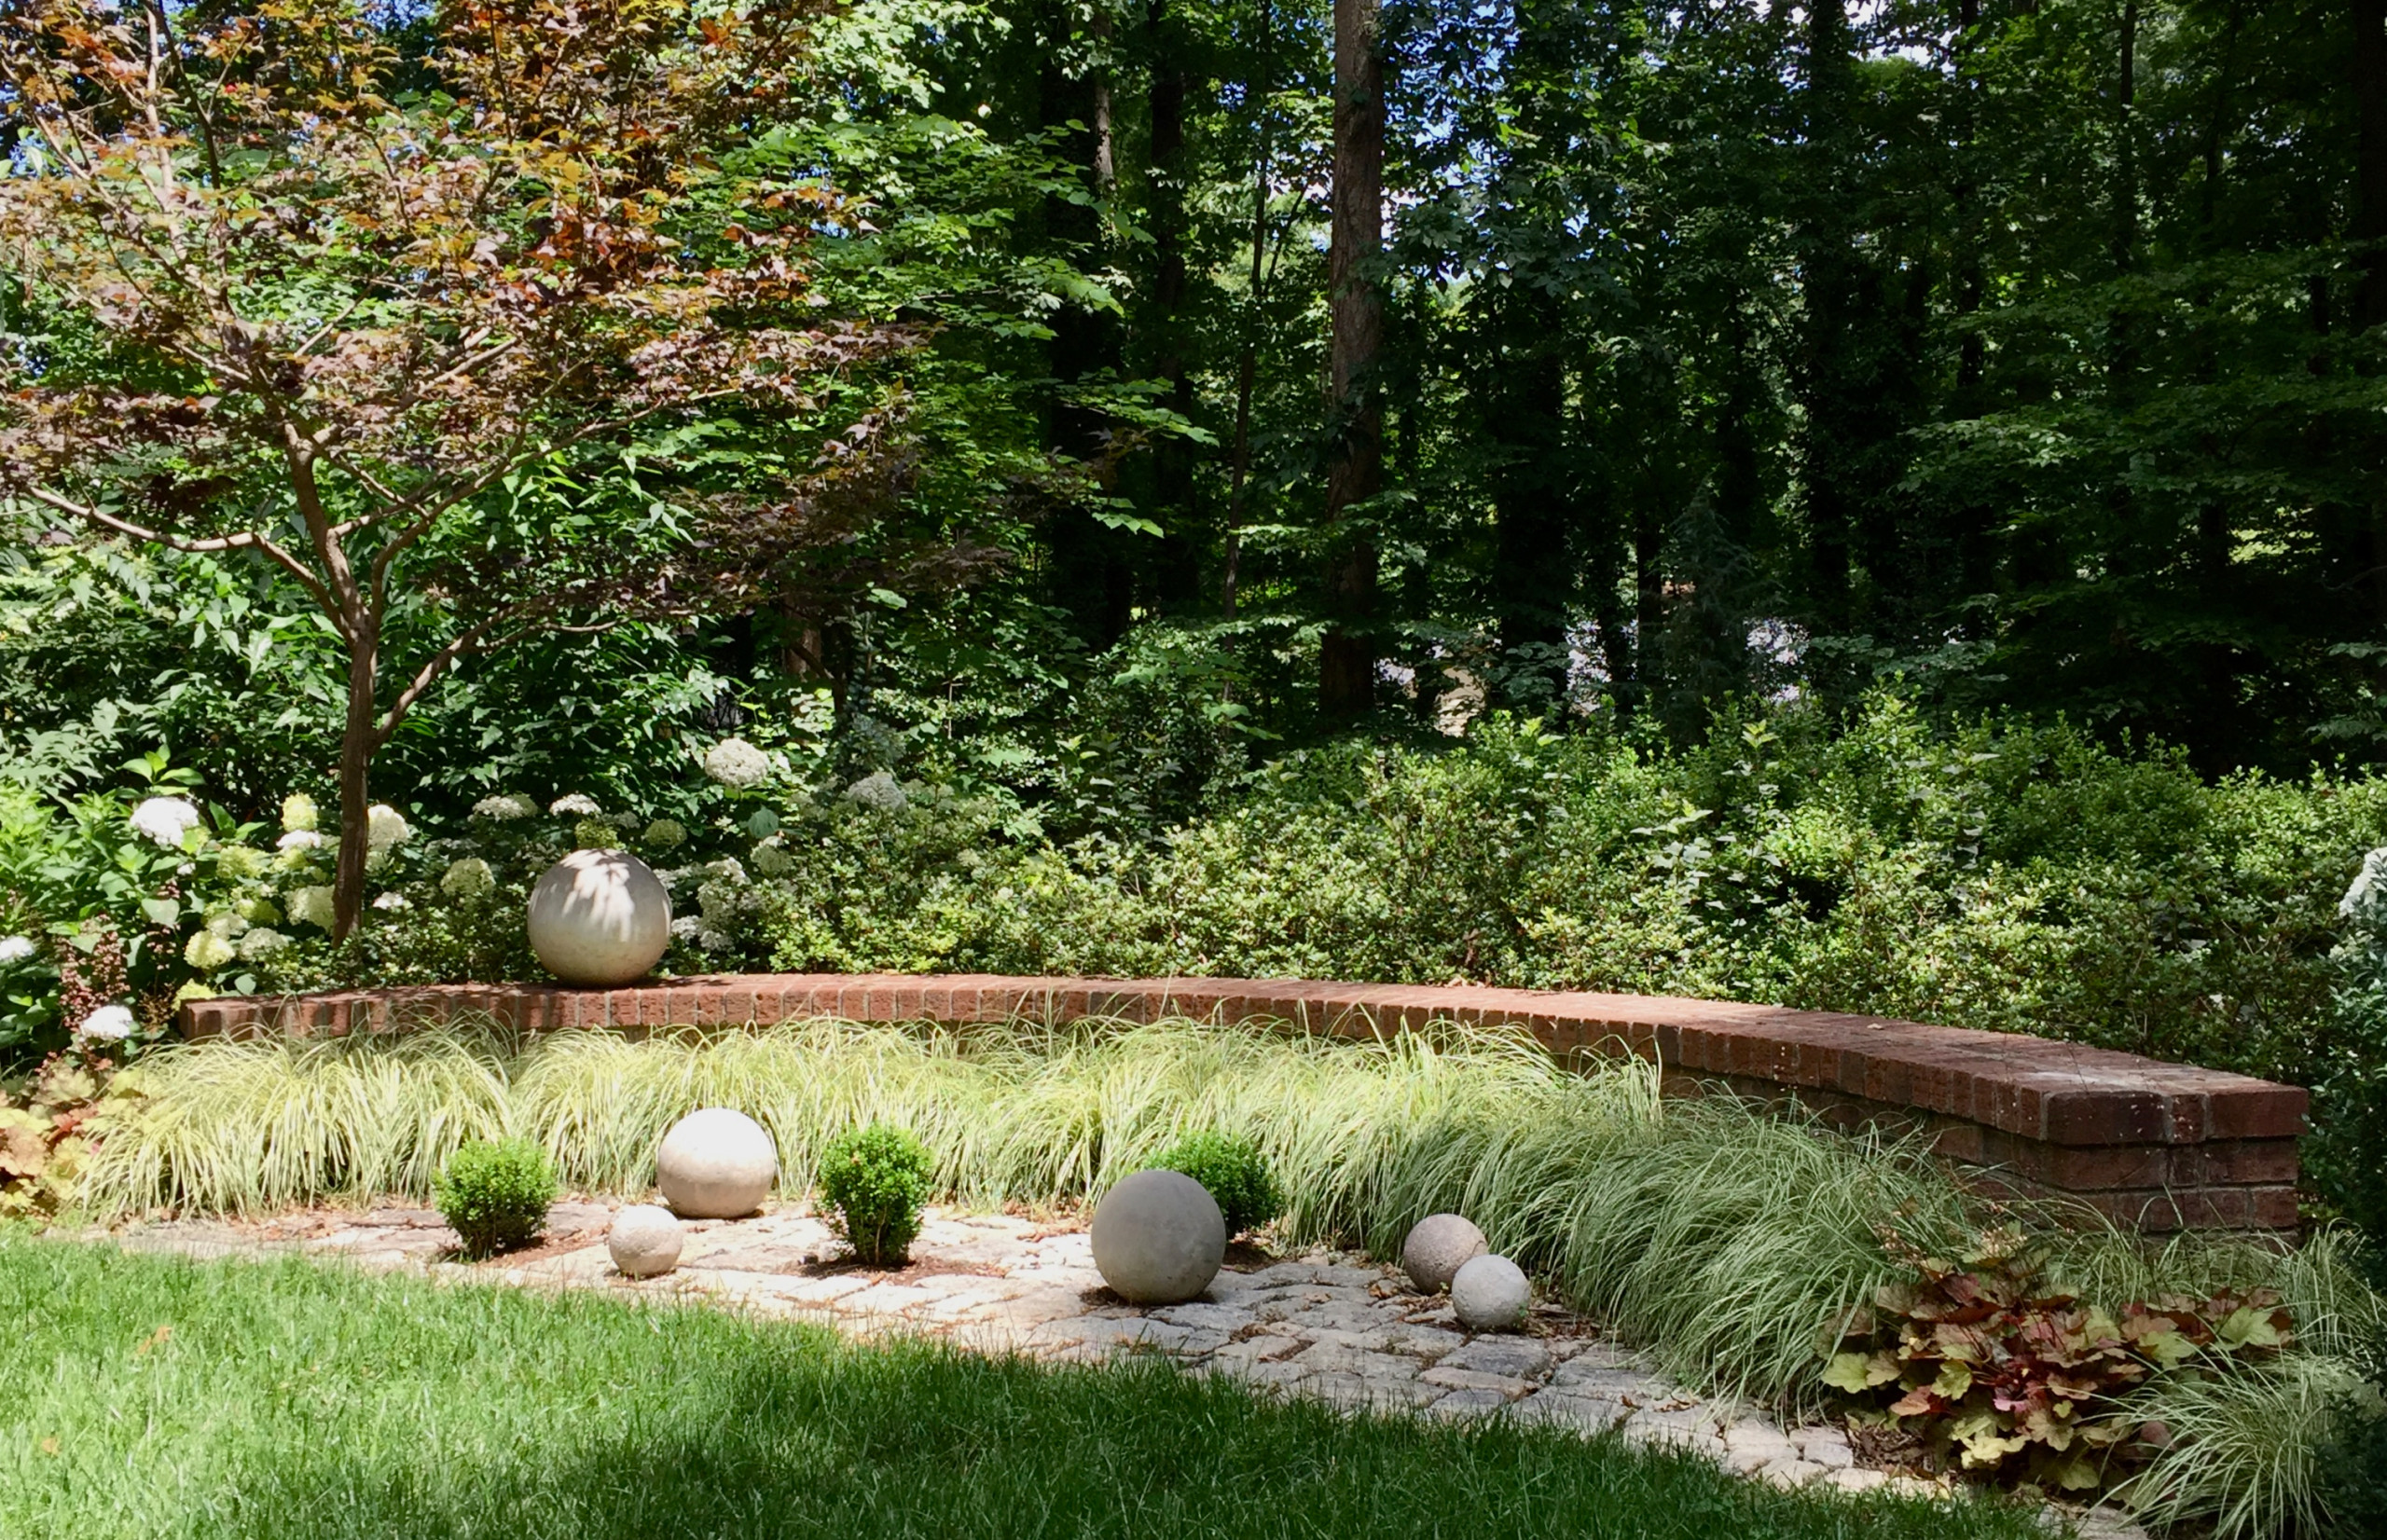 Contemporary touch to a traditional garden.